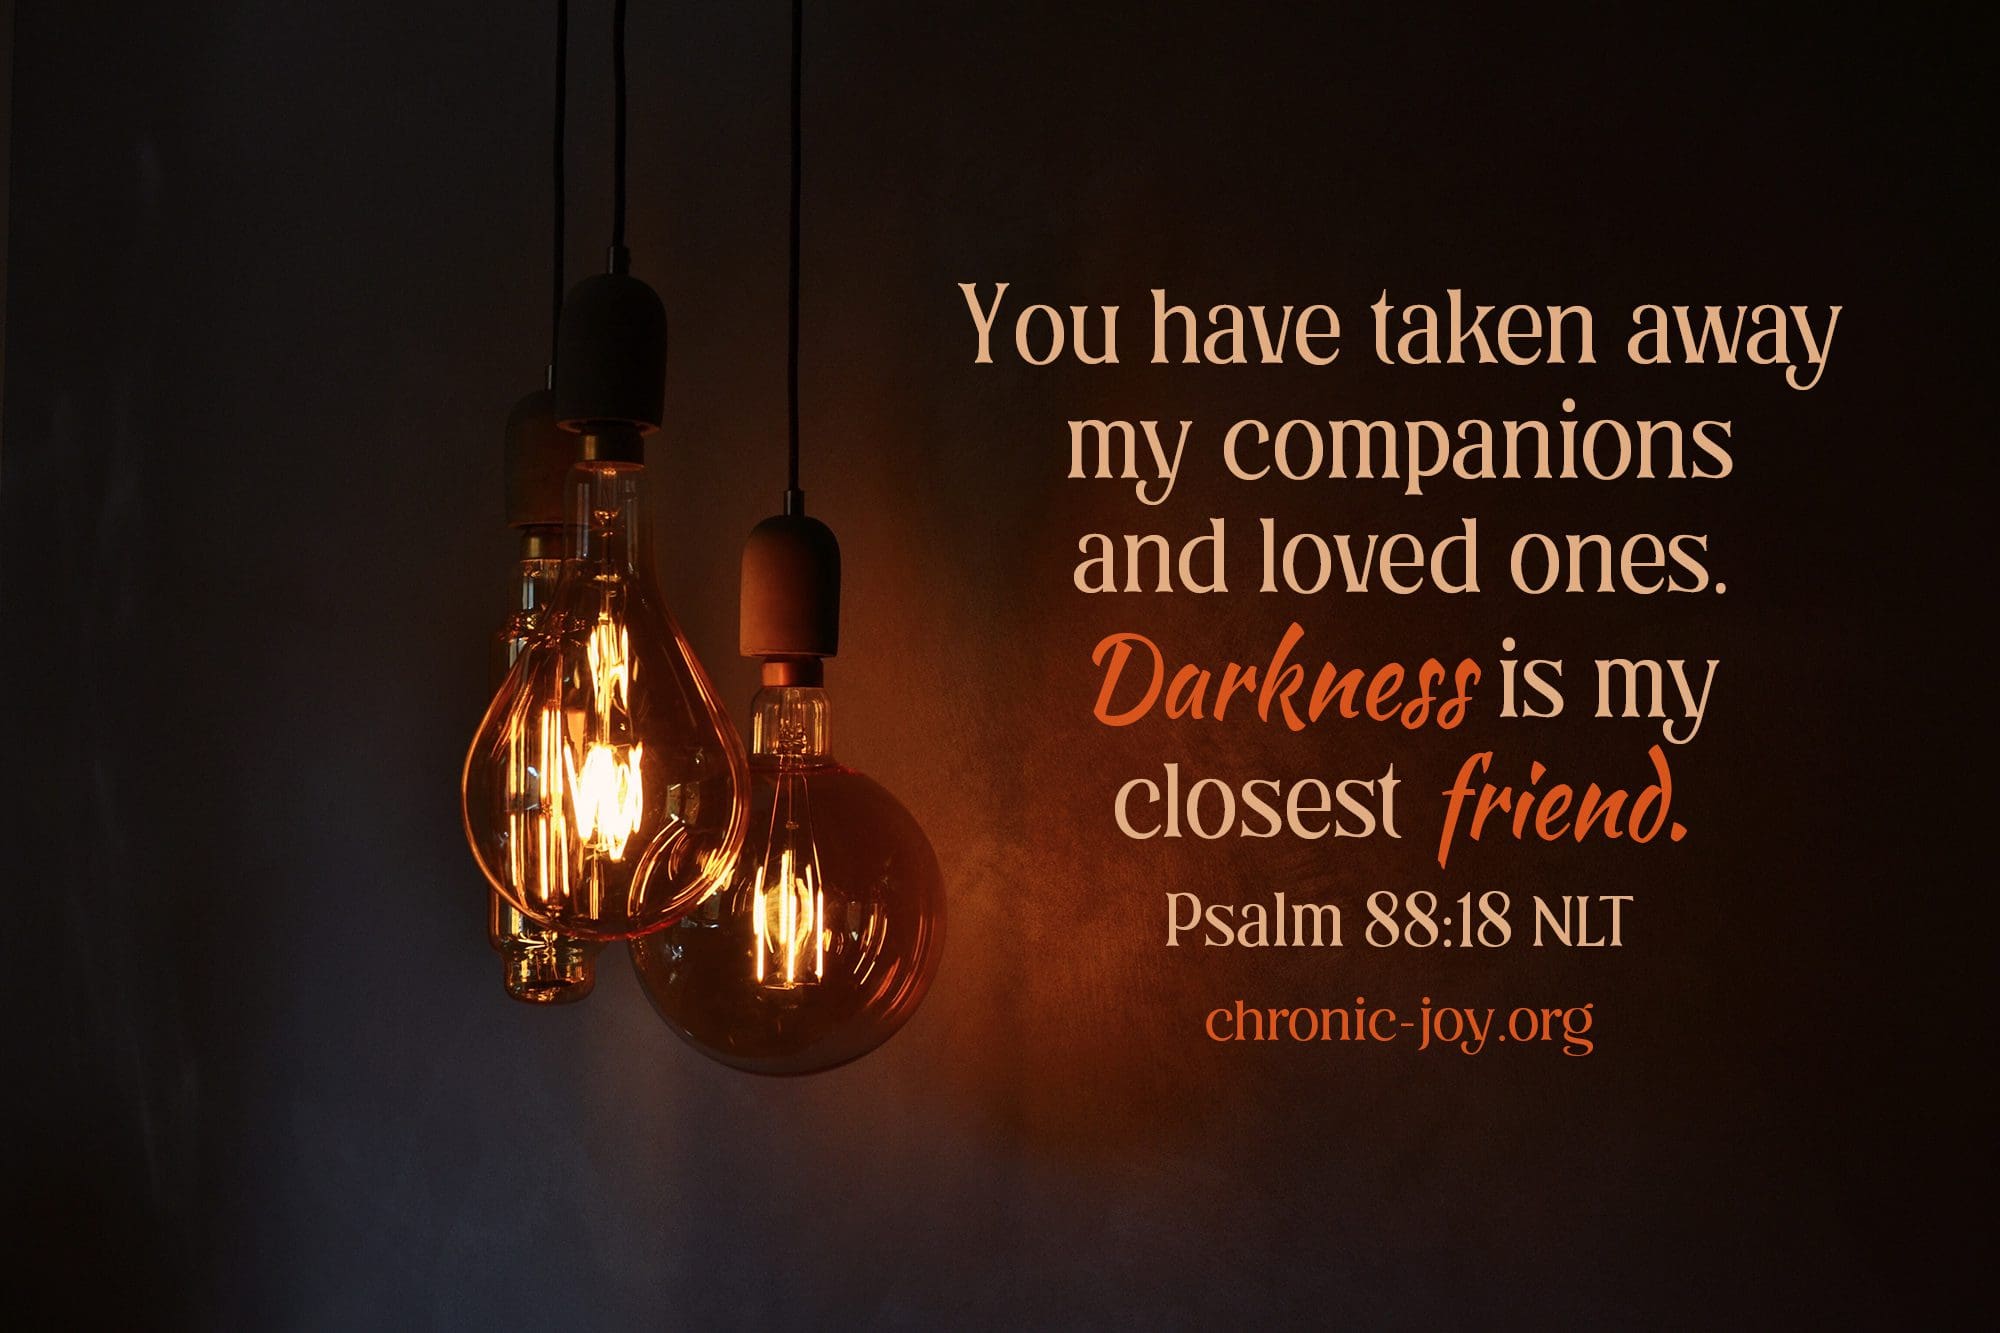 "You have taken away my companions and loved ones. Darkness is my closest friend." Psalm 88:18 NLT